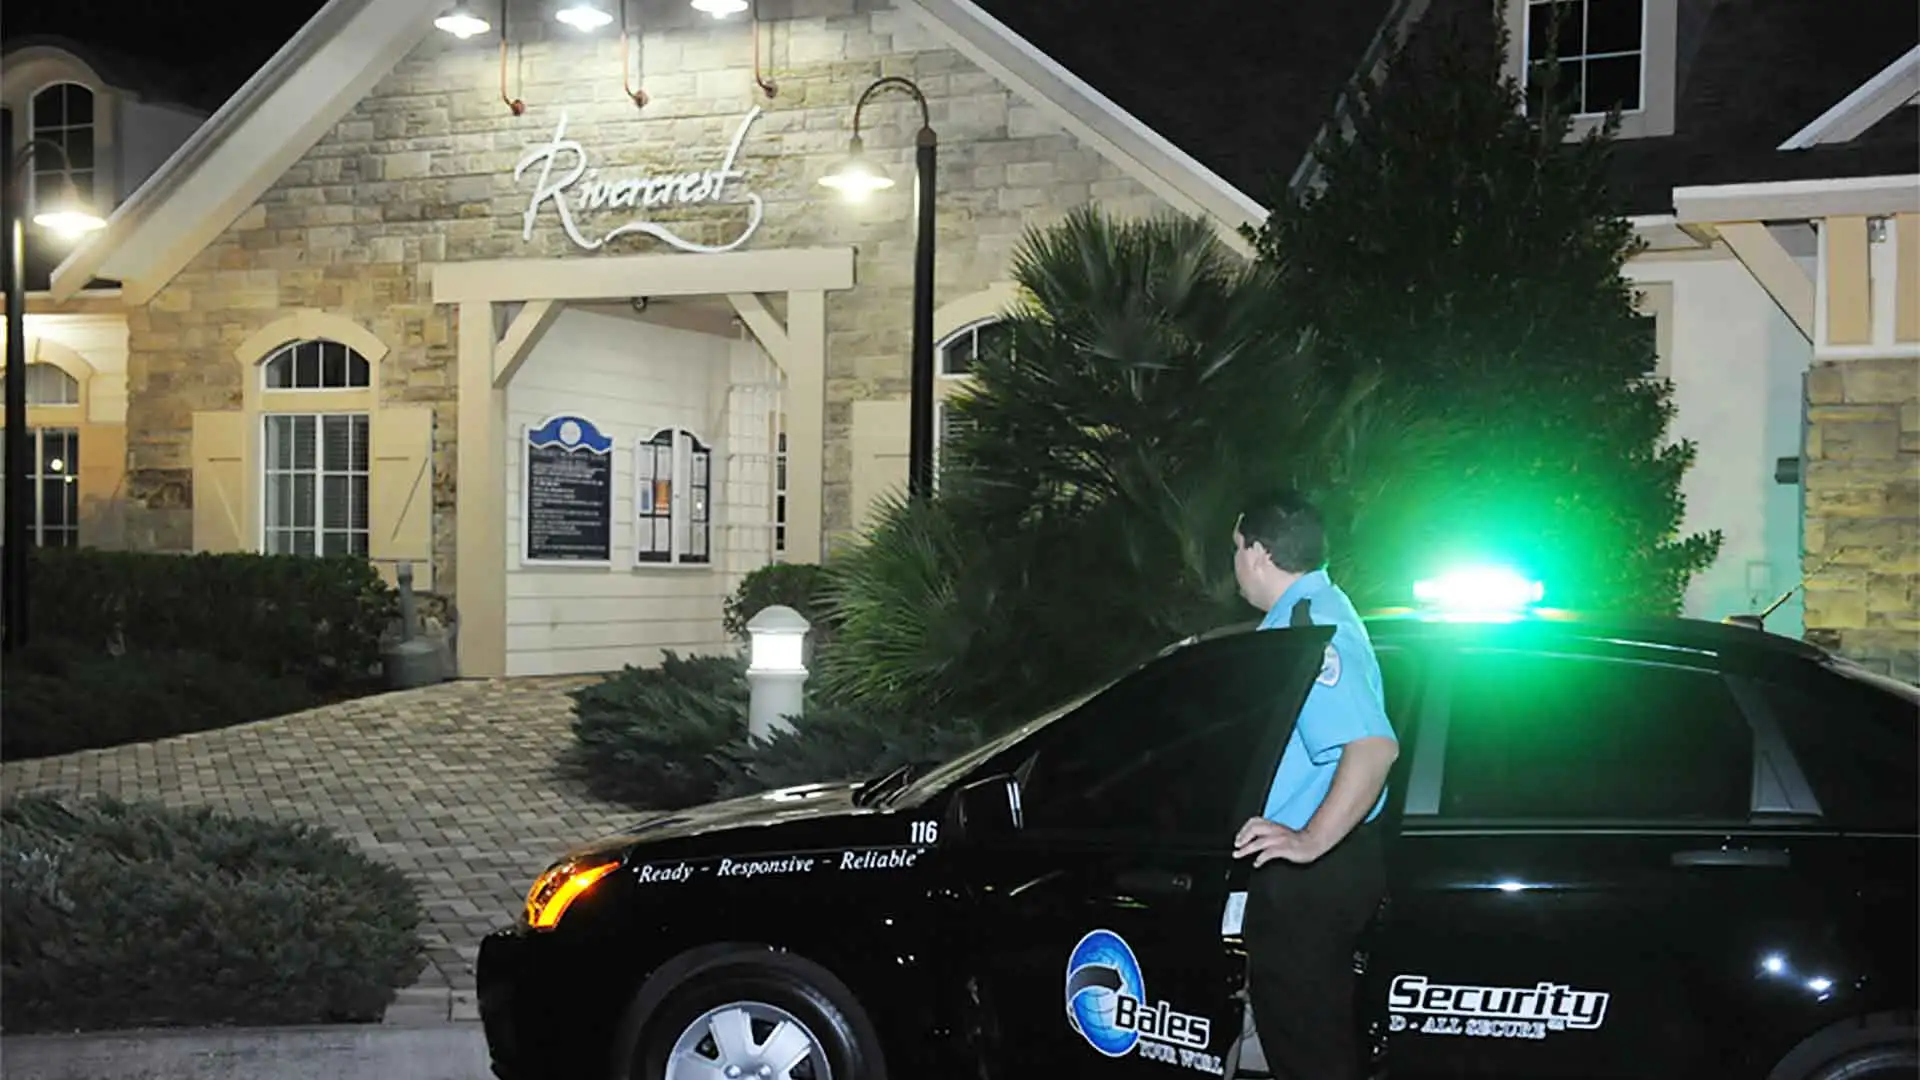 Our security team monitors a potential issue at a clubhouse in St. Petersburg, FL.